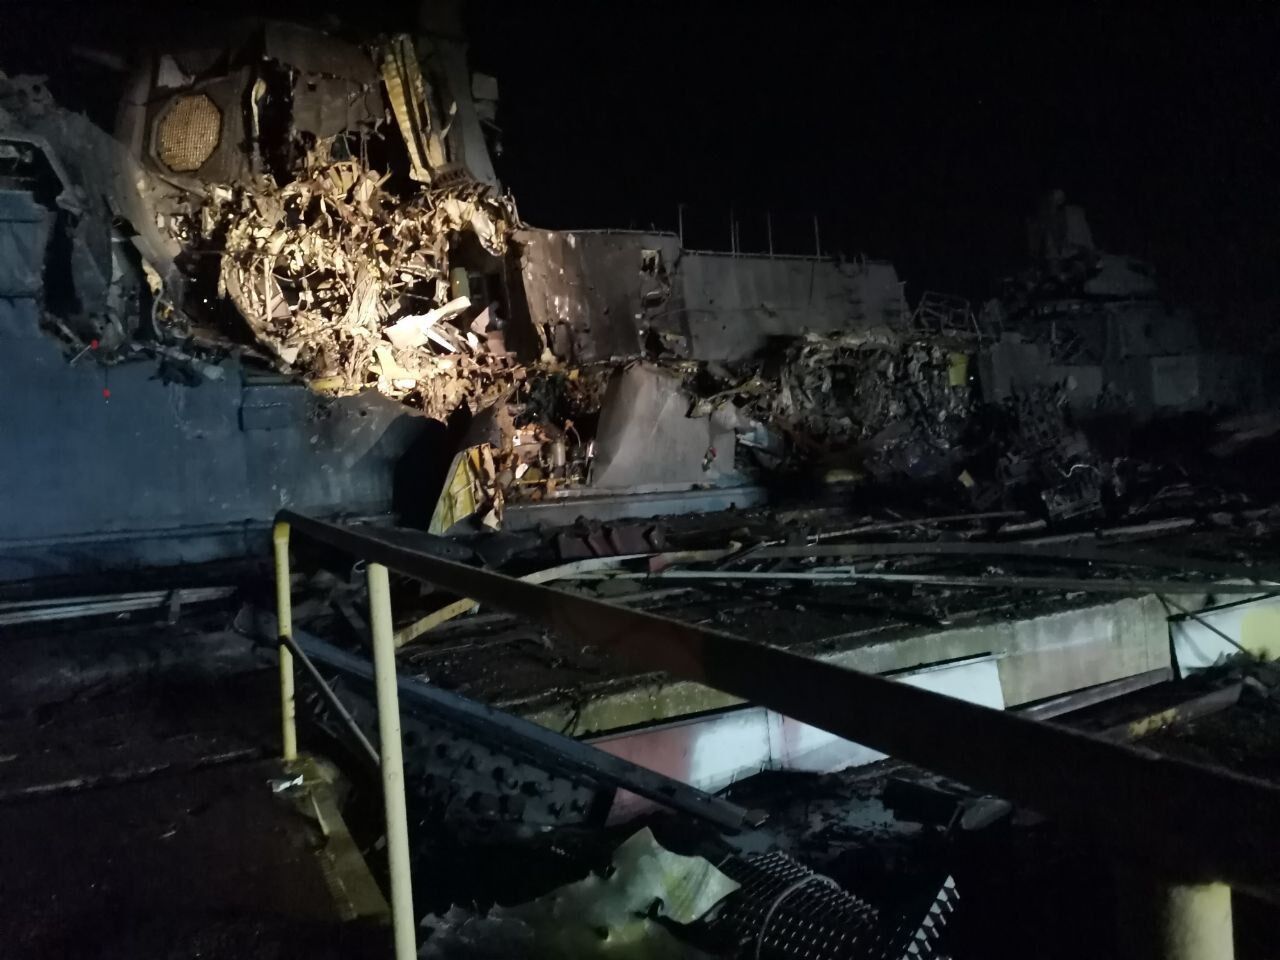 Two SCALP-EG cruise missiles hit the target: details of damage to the Russian Askold missile boat in Kerch are revealed. Photos and videos